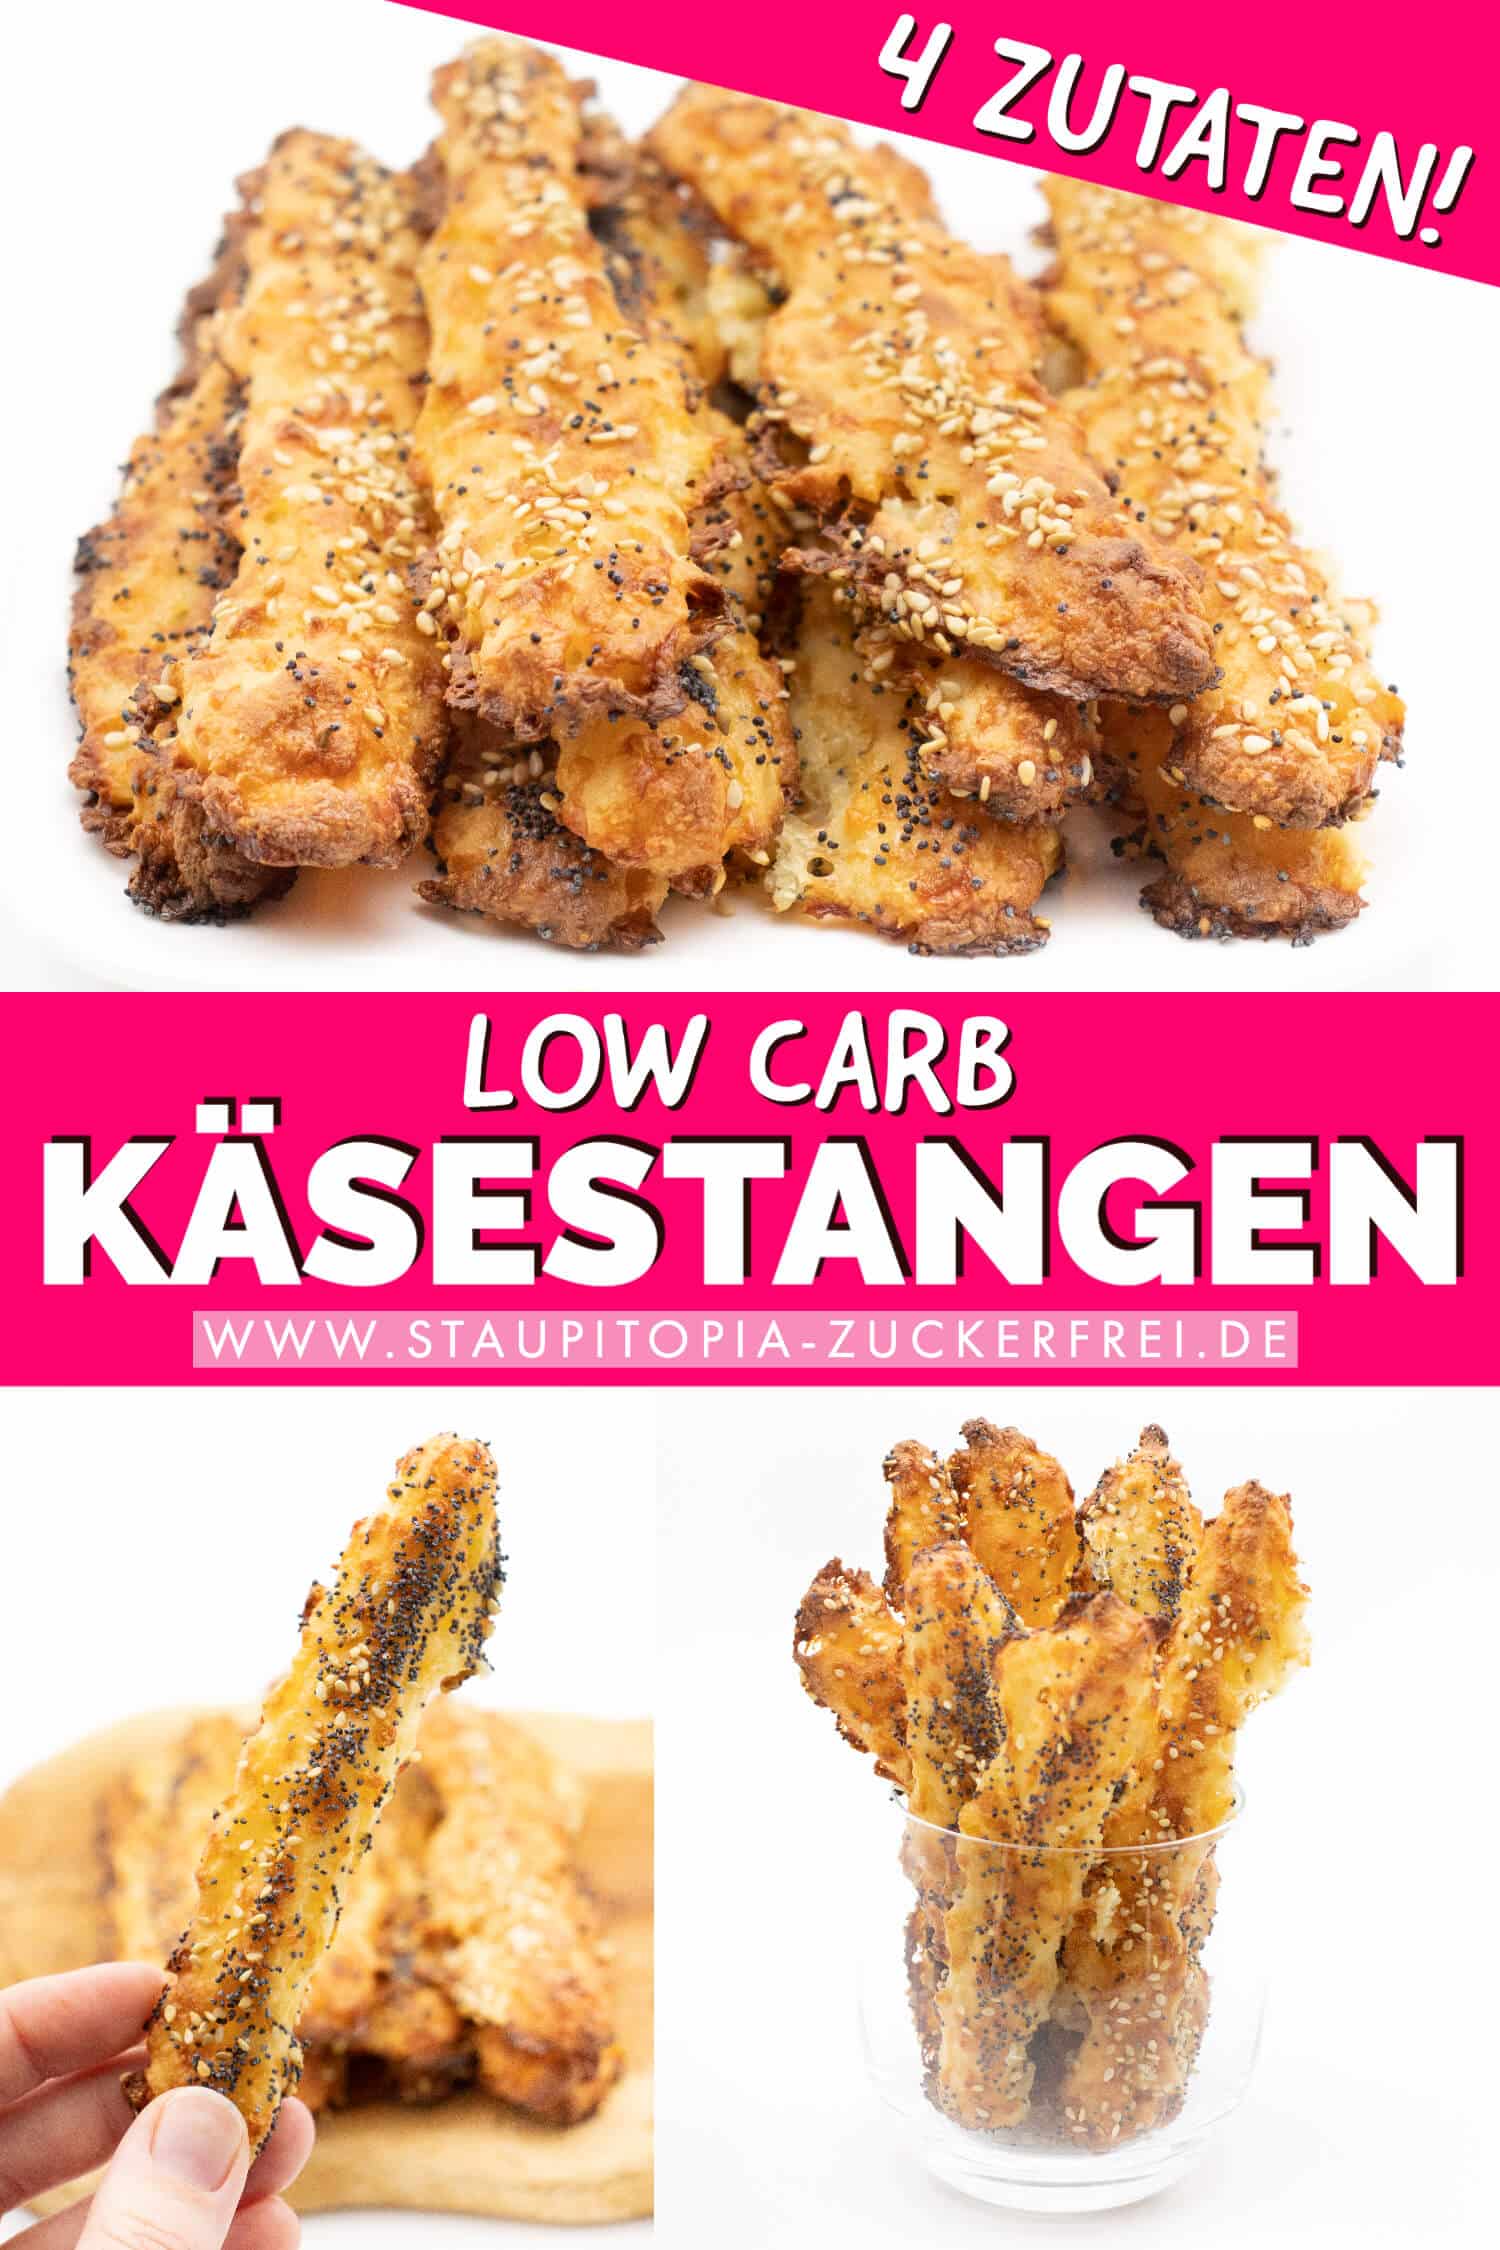 Low Carb Käsestangen - herzhafter Low Carb Snack ohne Kohlenhydrate